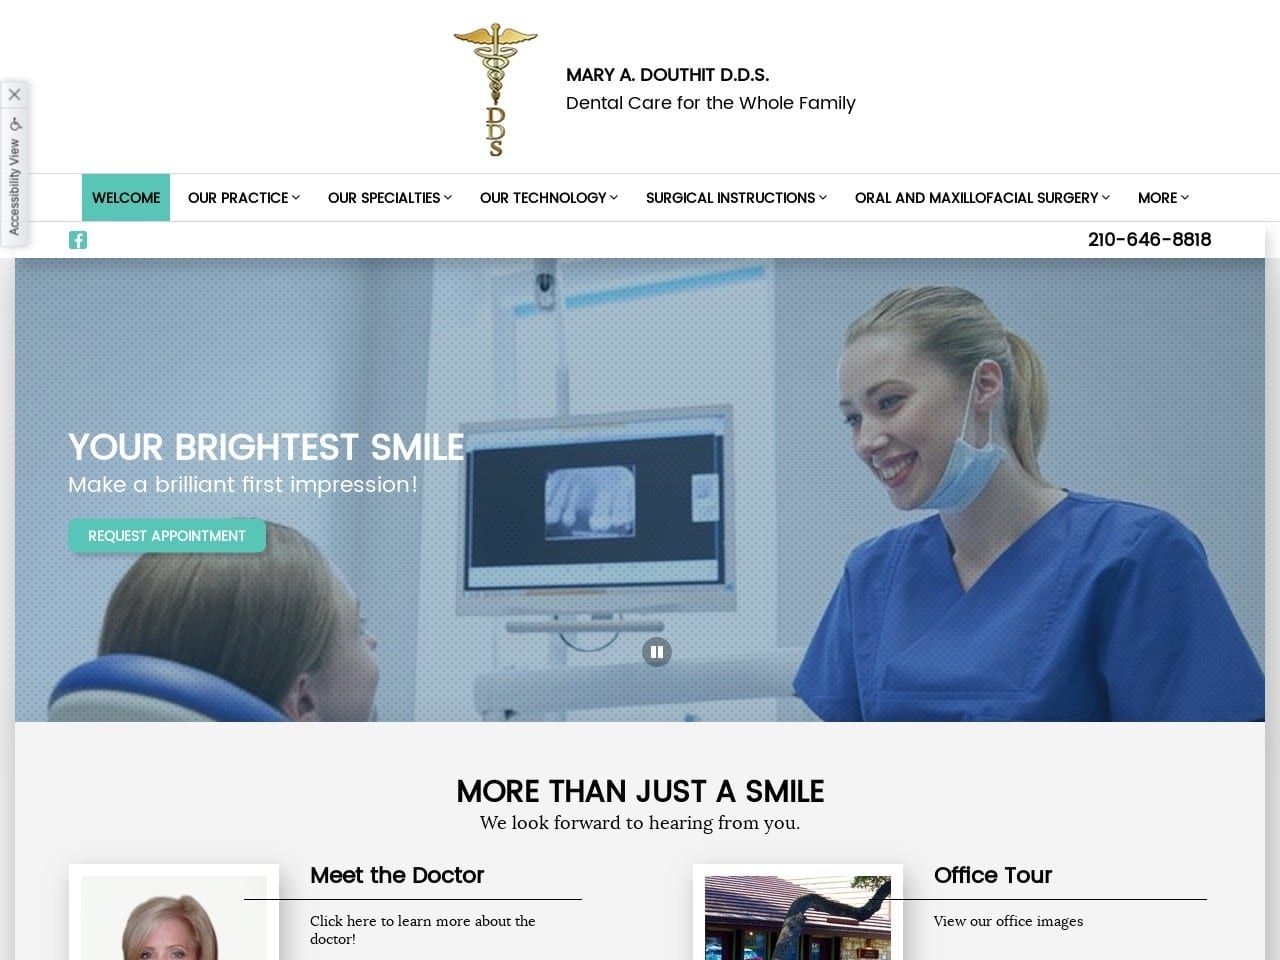 Dr. Mary A. Douthit DDS Website Screenshot from morethanjustasmile.com